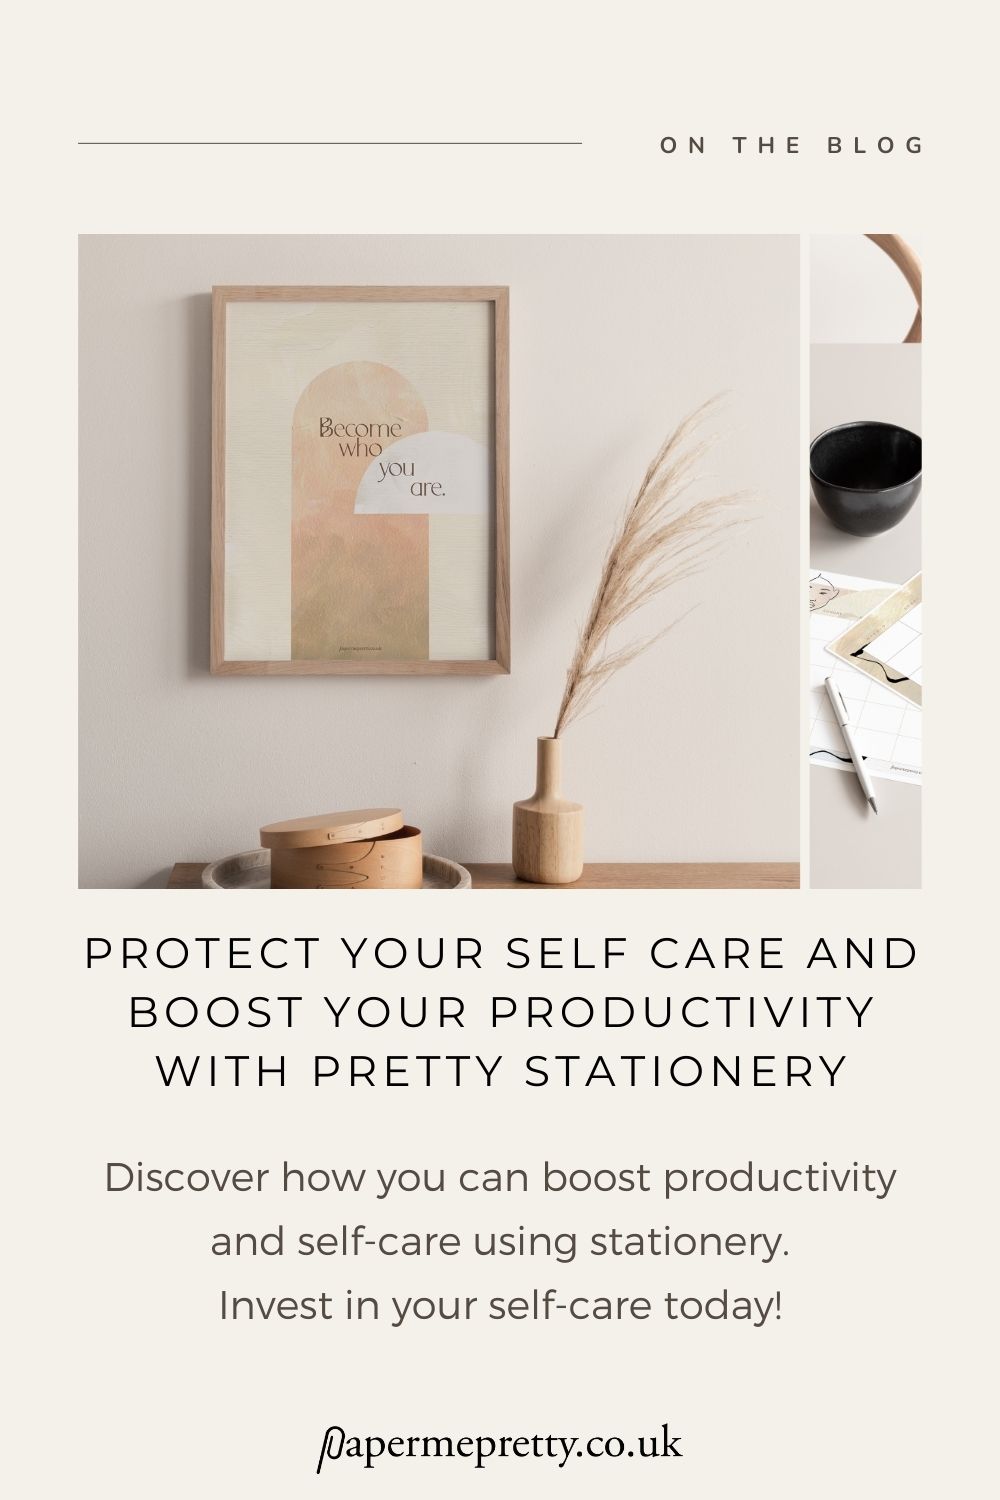 Dive into the world of pretty stationery! Discover how journaling and reflection can boost productivity and self-care. Explore Paper Me Pretty's exclusive club for monthly inspiration. Invest in your self-care today! ✨📝 #PrettyStationery #mindfulness #SelfCare #stationeryaddict #journal 